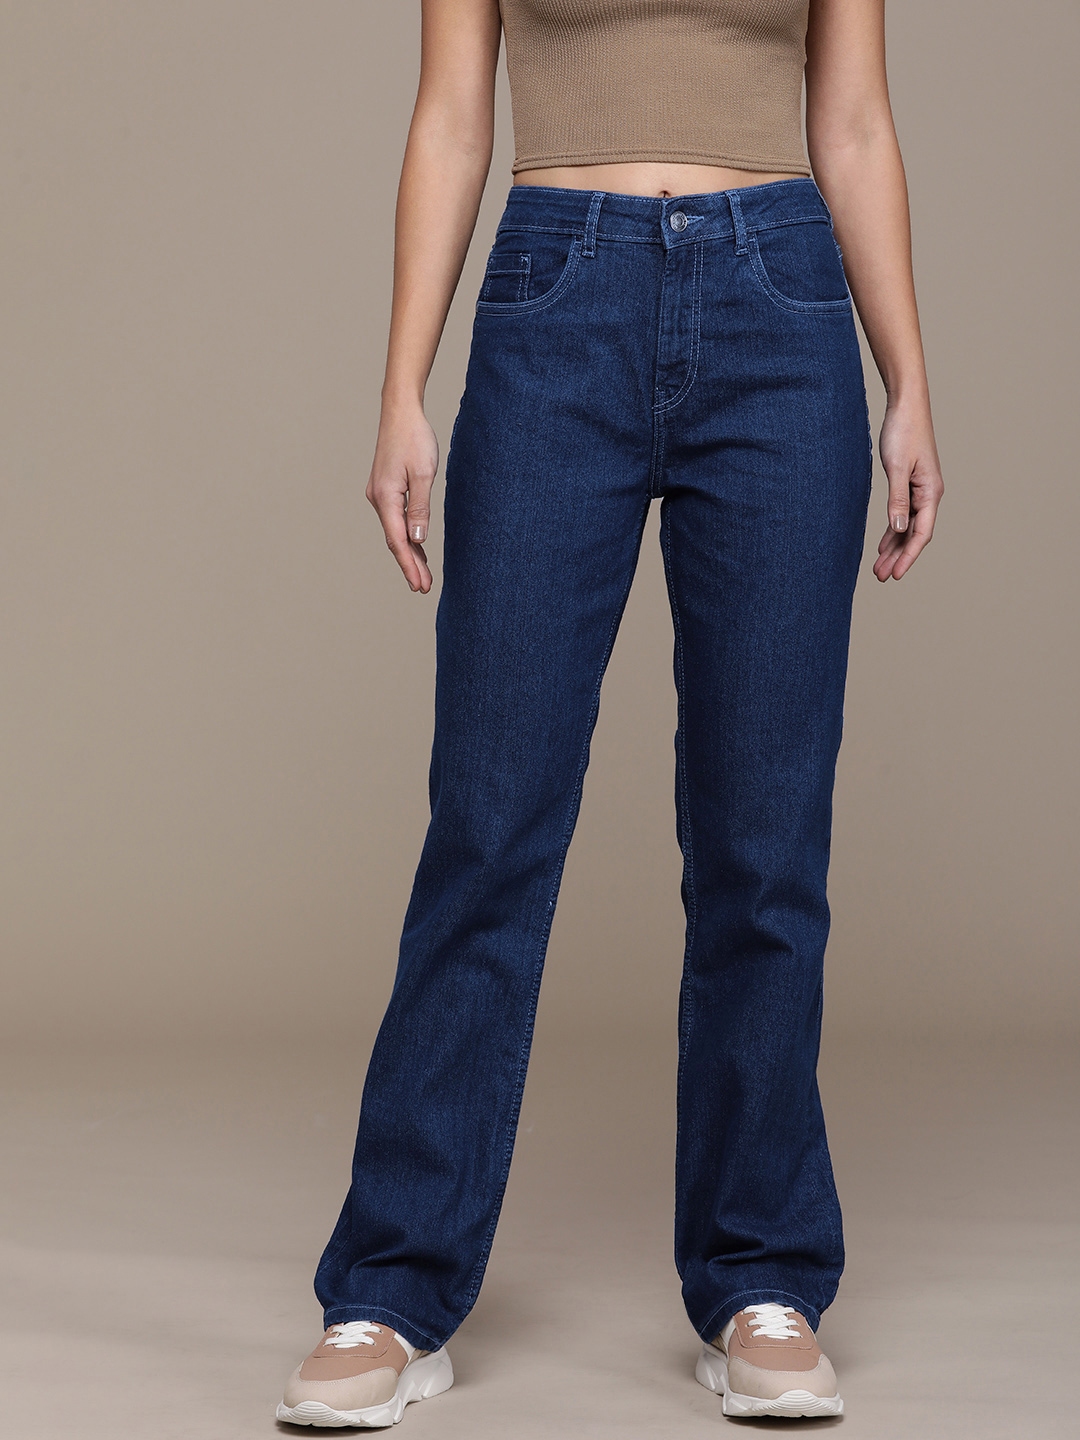 Buy The Roadster Lifestyle Co. Women Straight Fit Stretchable Jeans ...